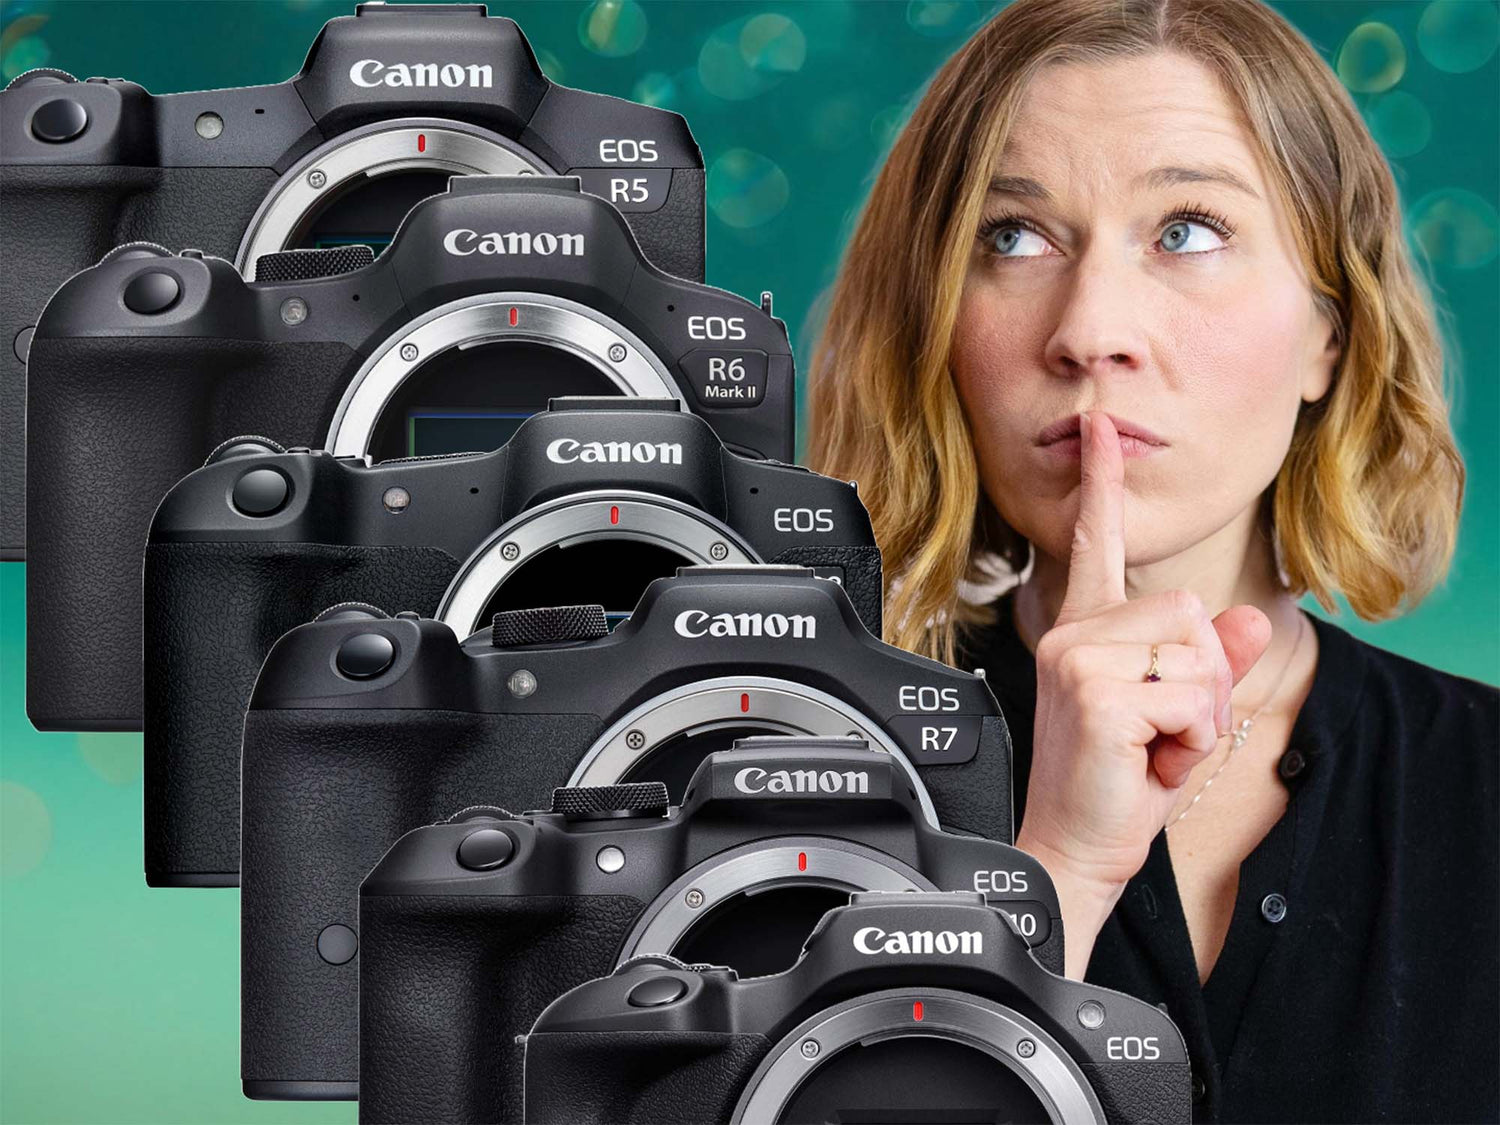 Canon Mirrorless Lineup Explained for Underwater [VIDEO]